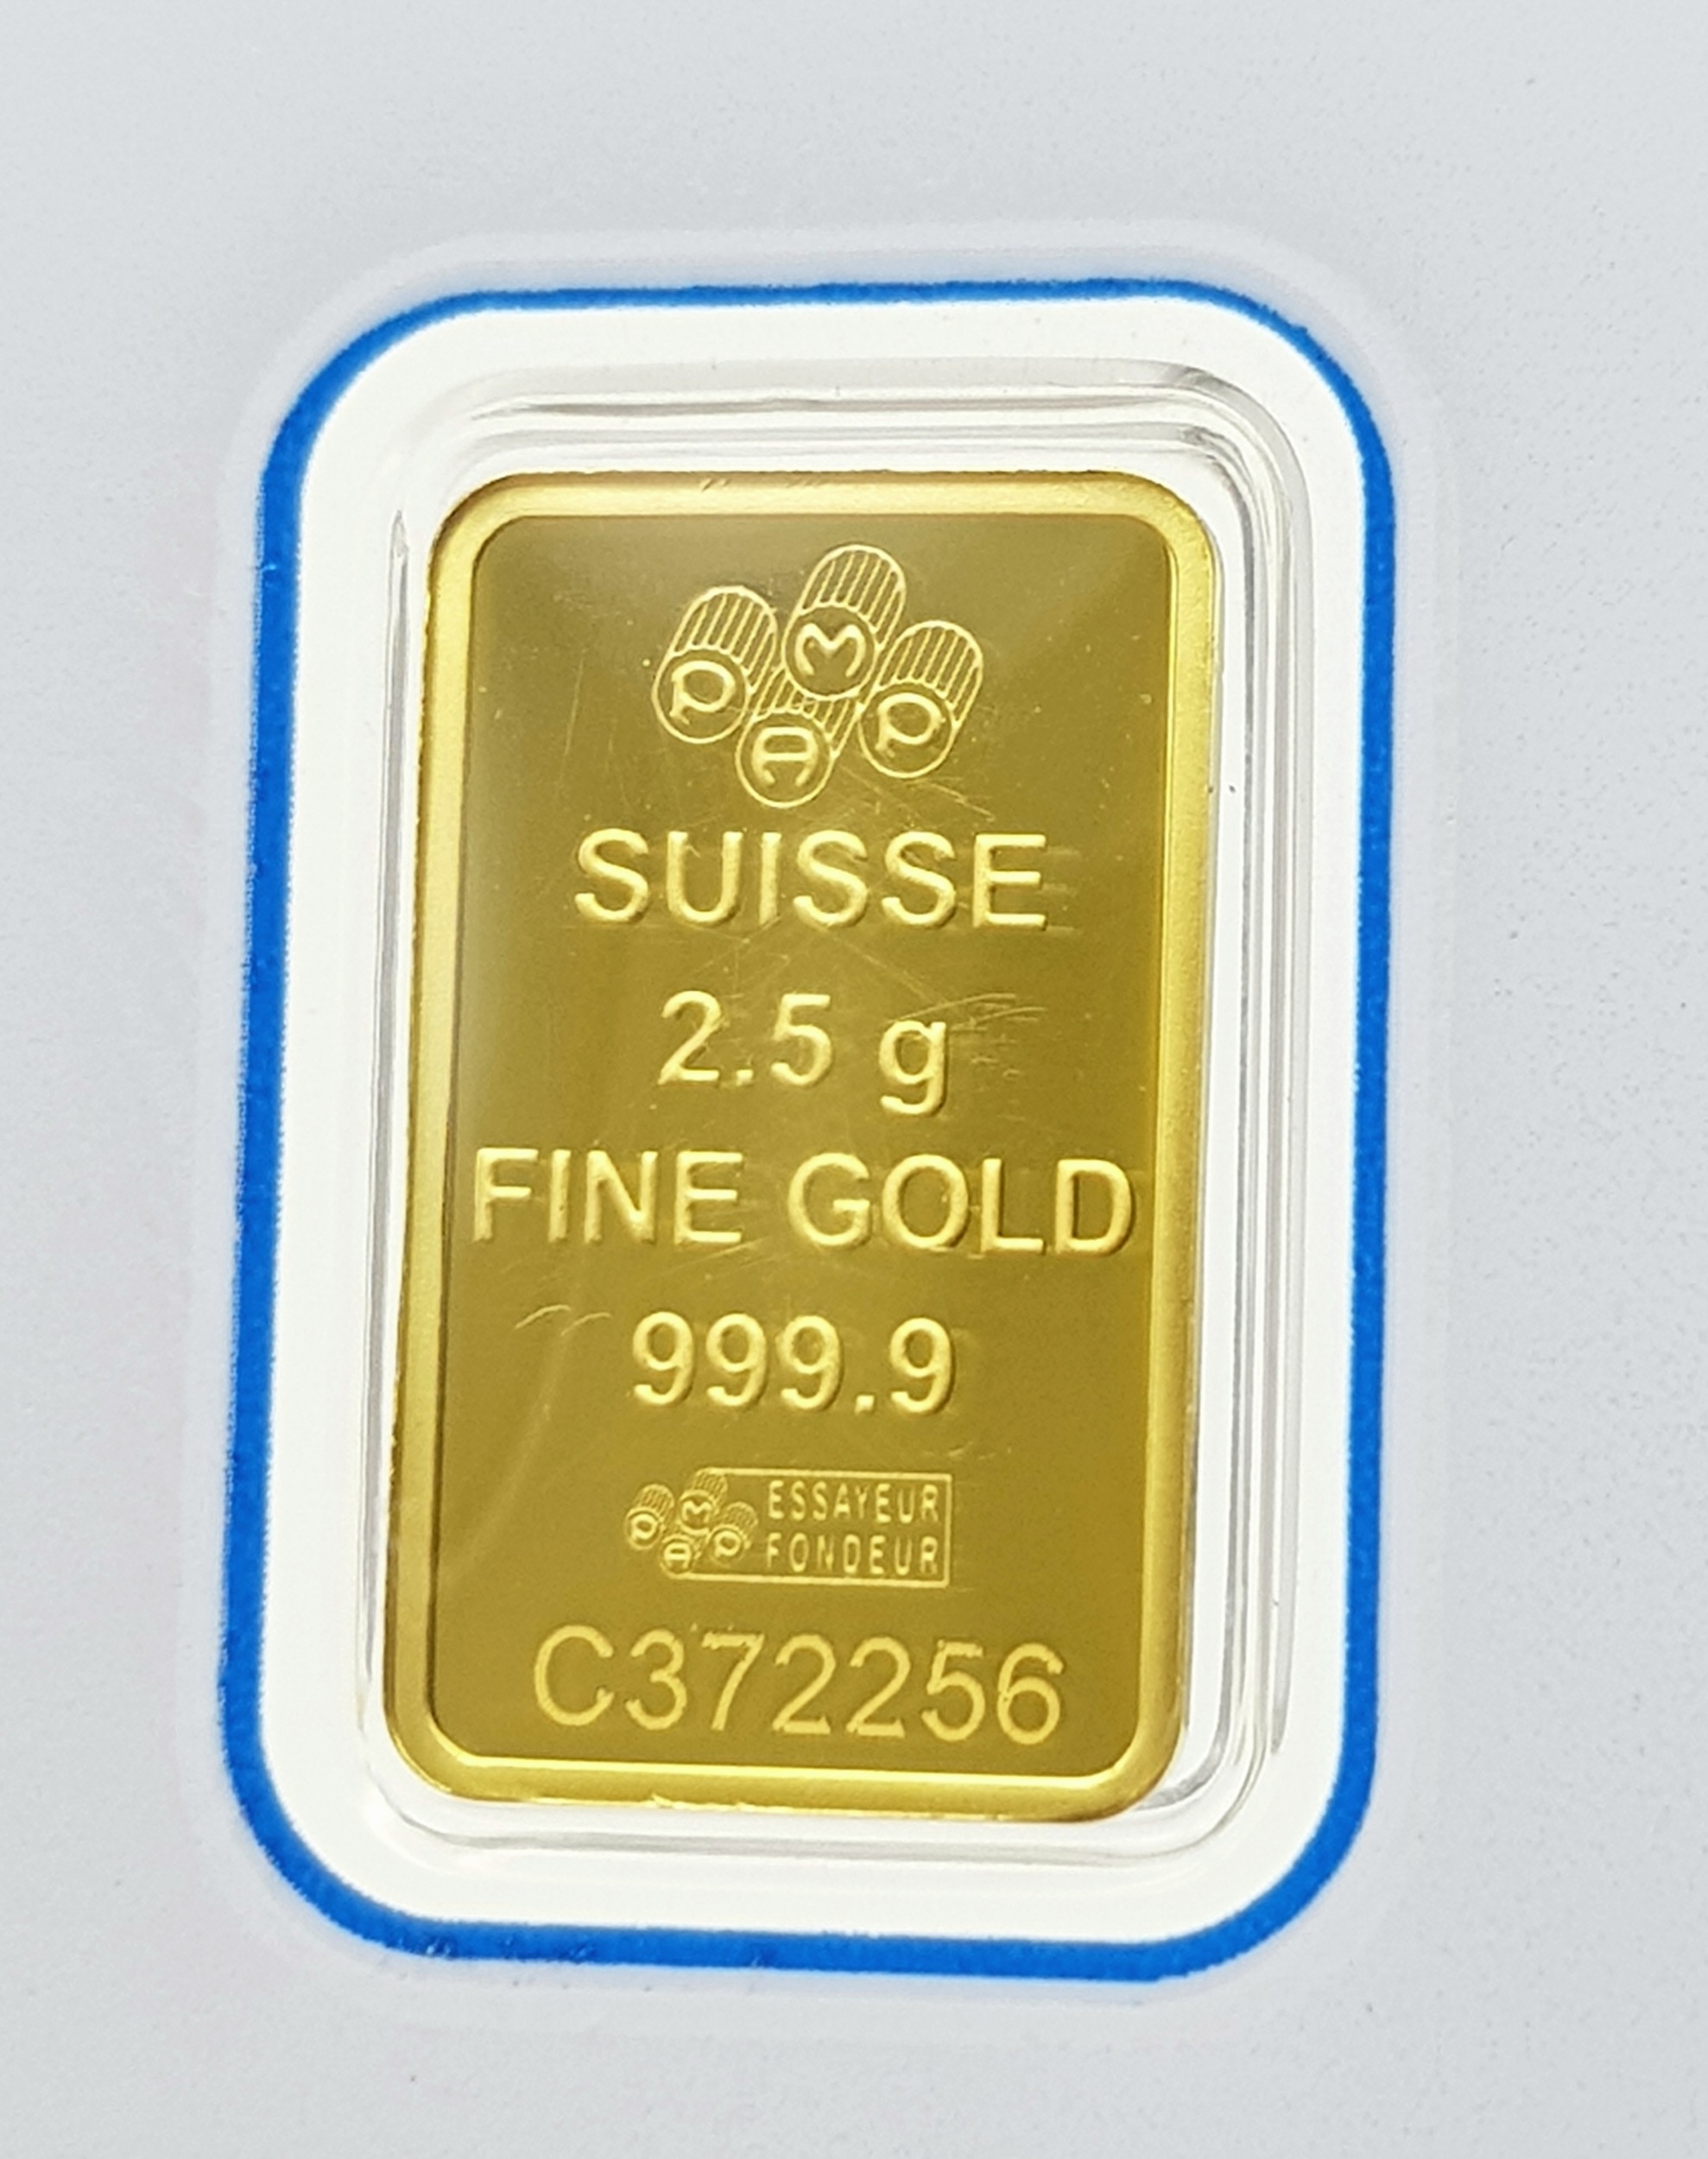 A 2.5g Fine Gold (.999) Swiss Ingot. Comes in a self contained package.